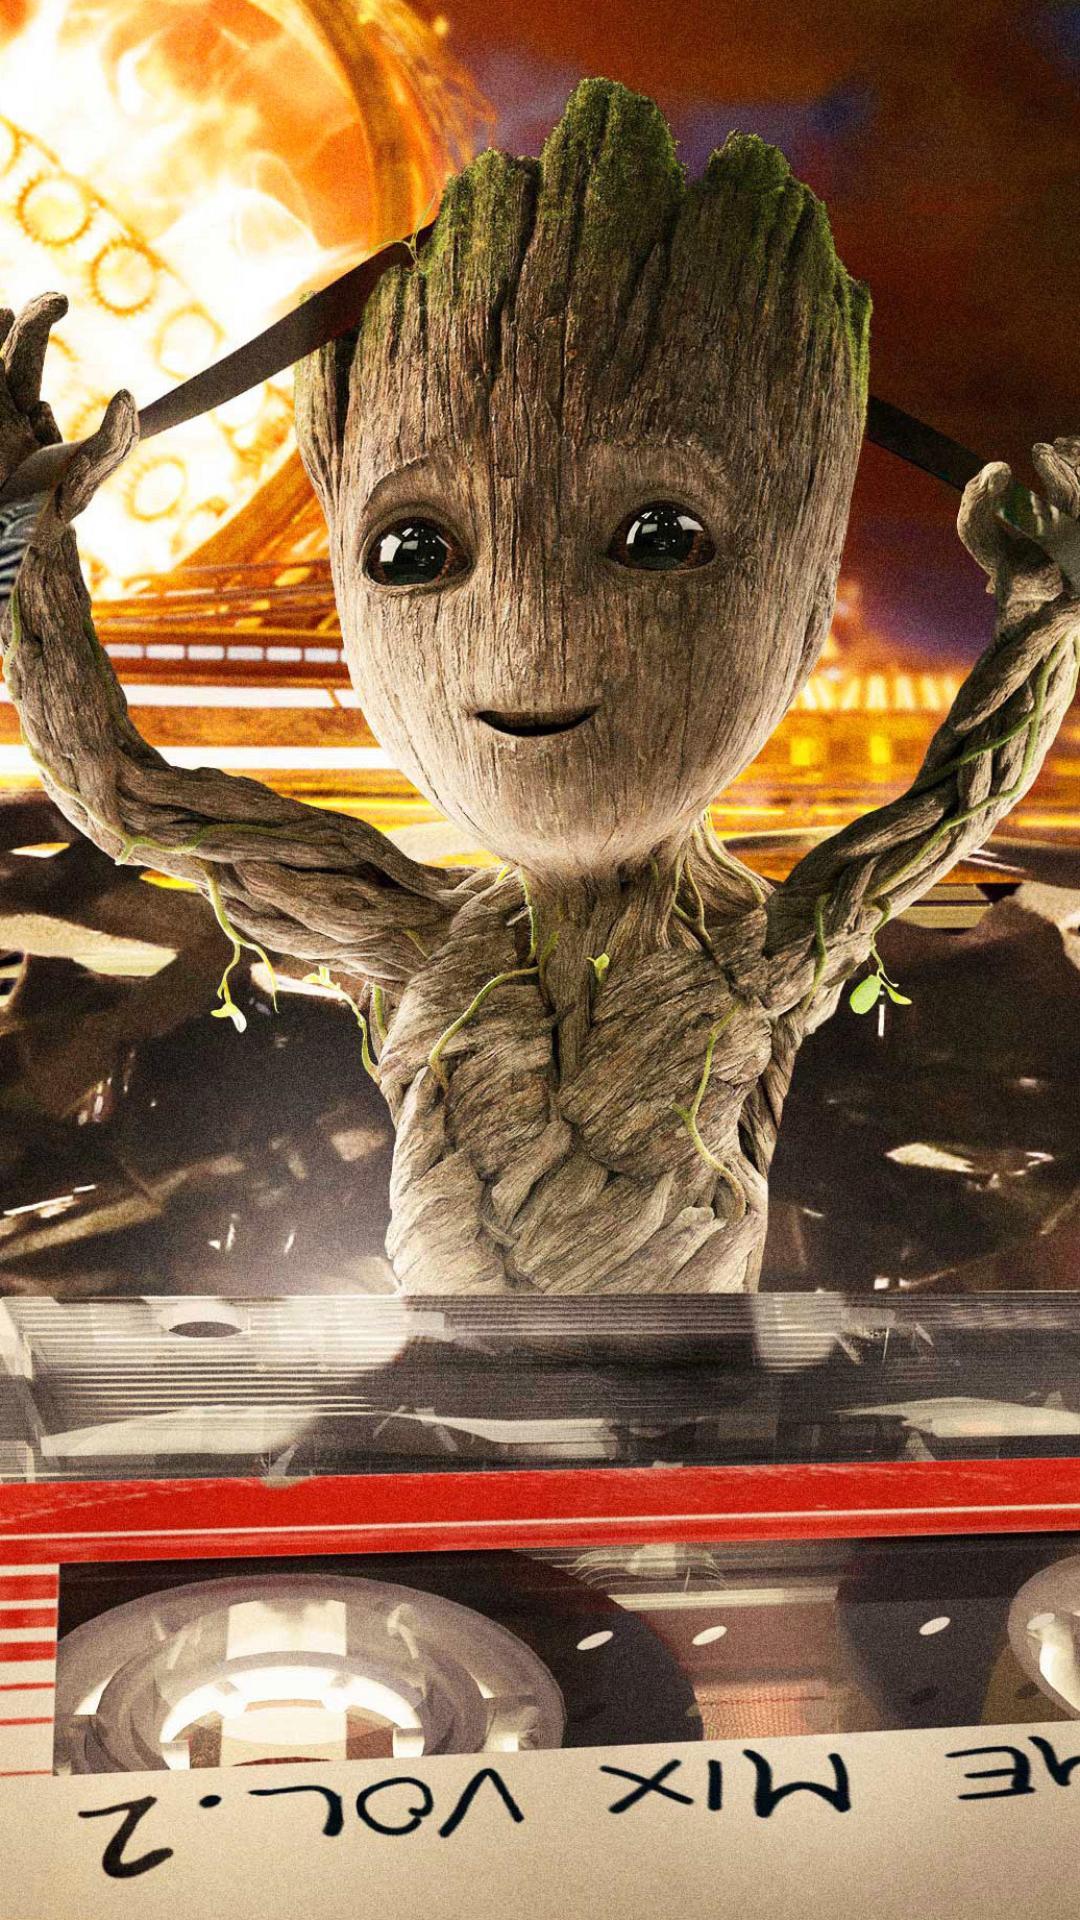 Full HD The Guardians Of The Galaxy Wallpaper for Android